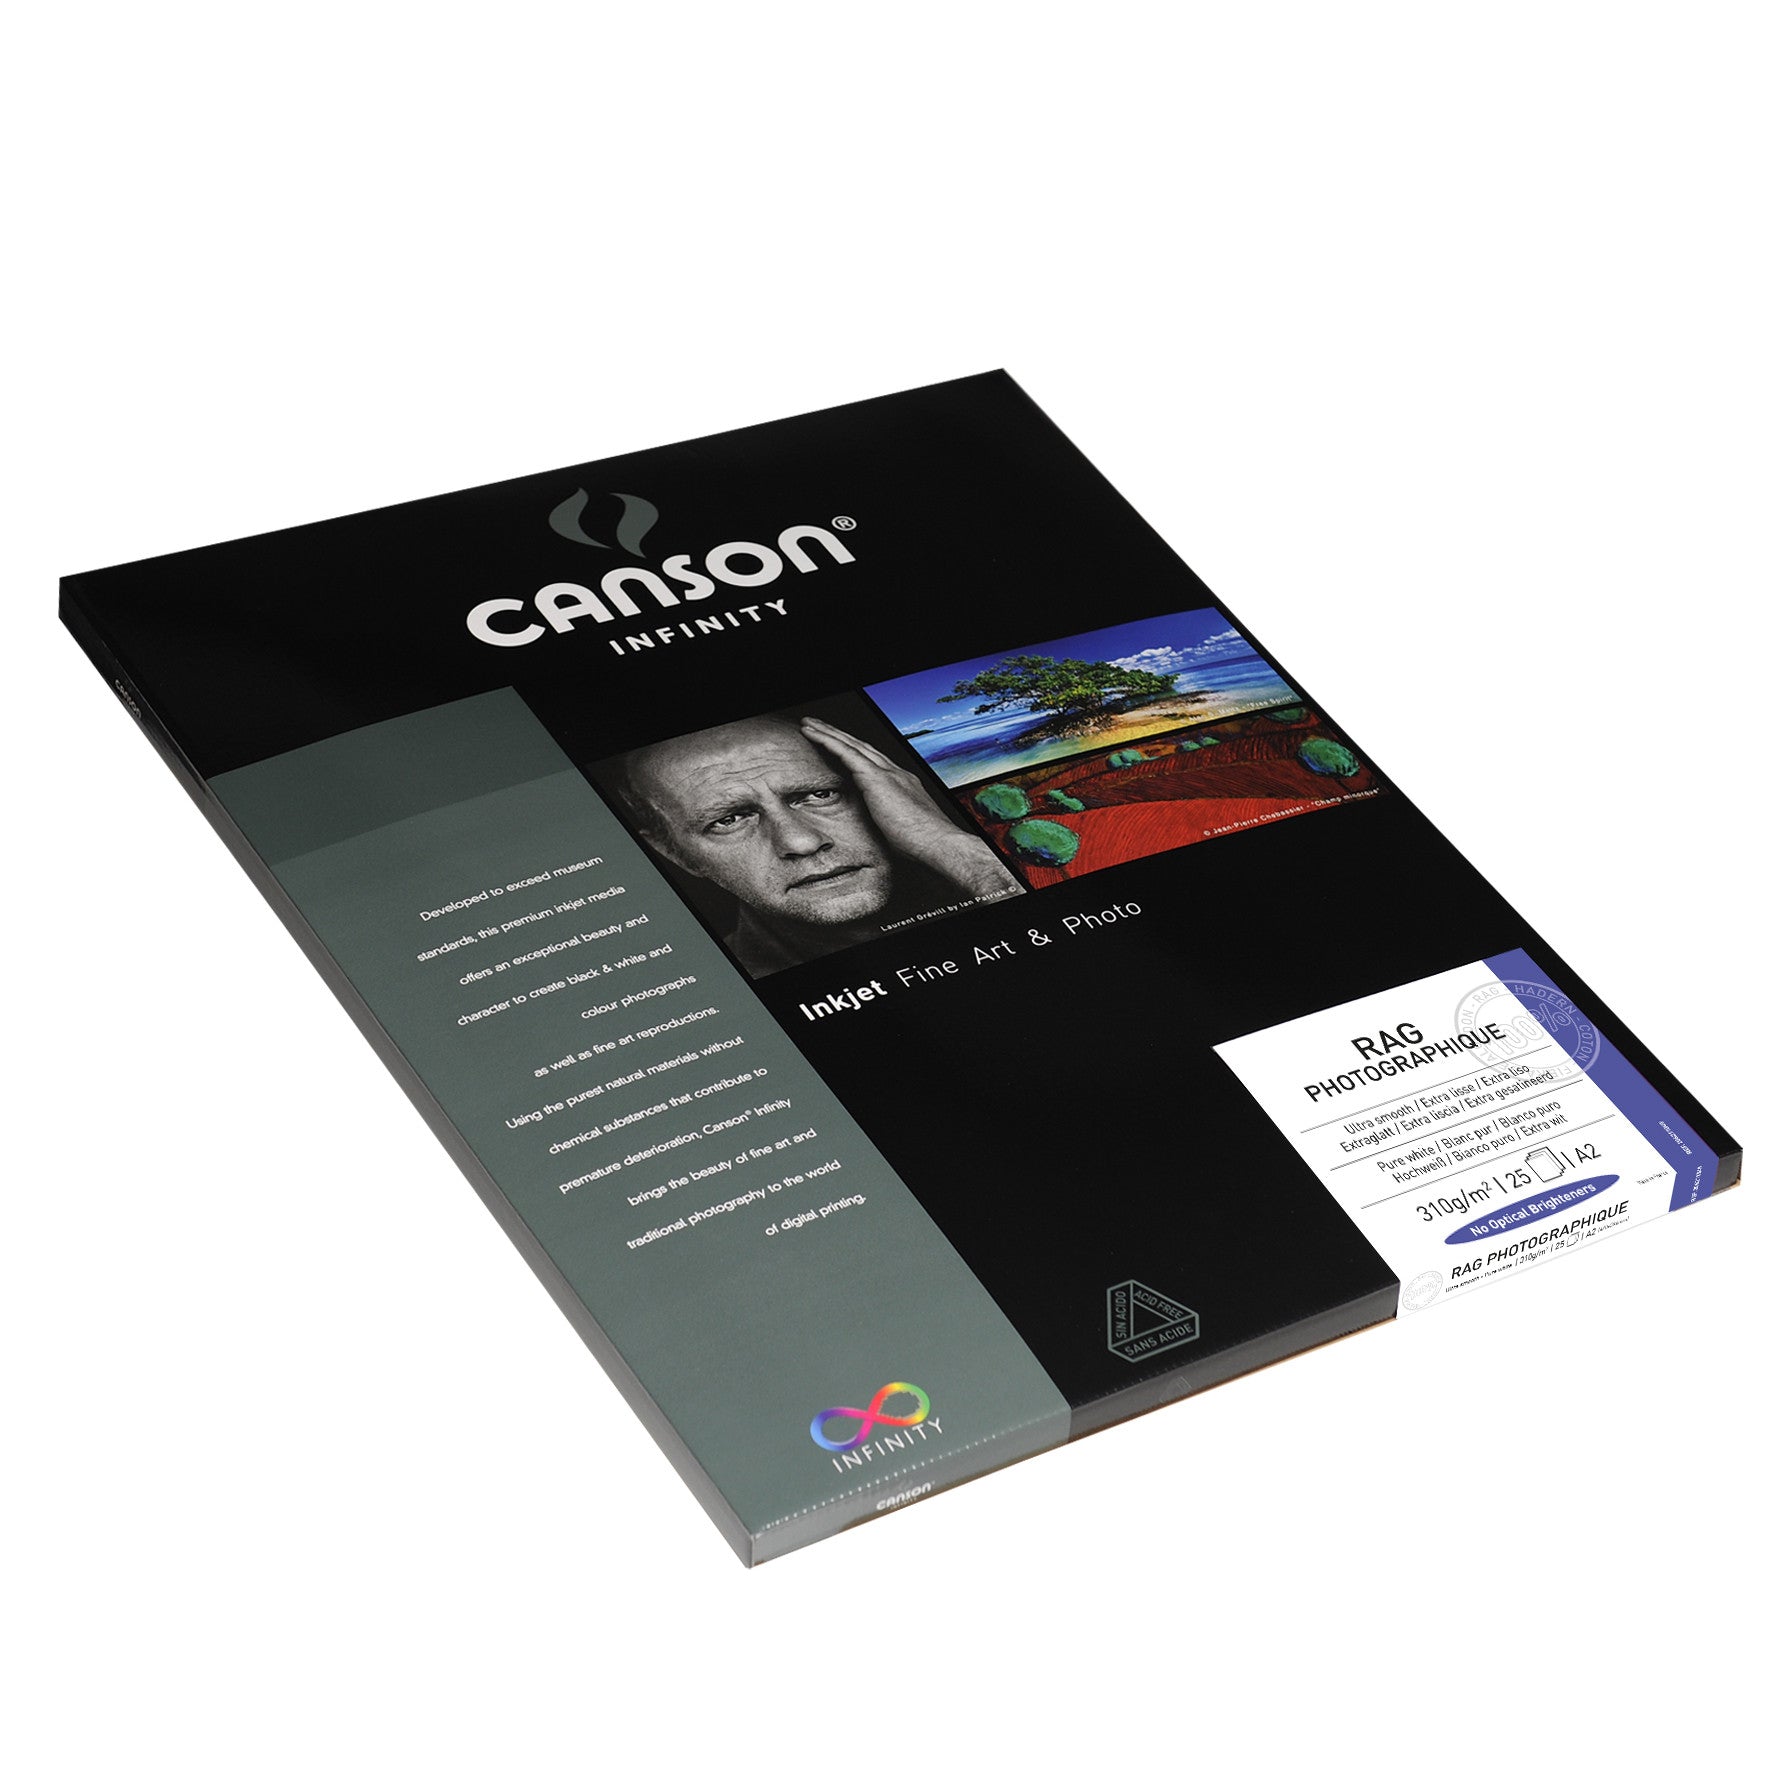 Canson Infinity Rag Photographique - 310gsm - A2 (25 sheets) - Wall Your Photos